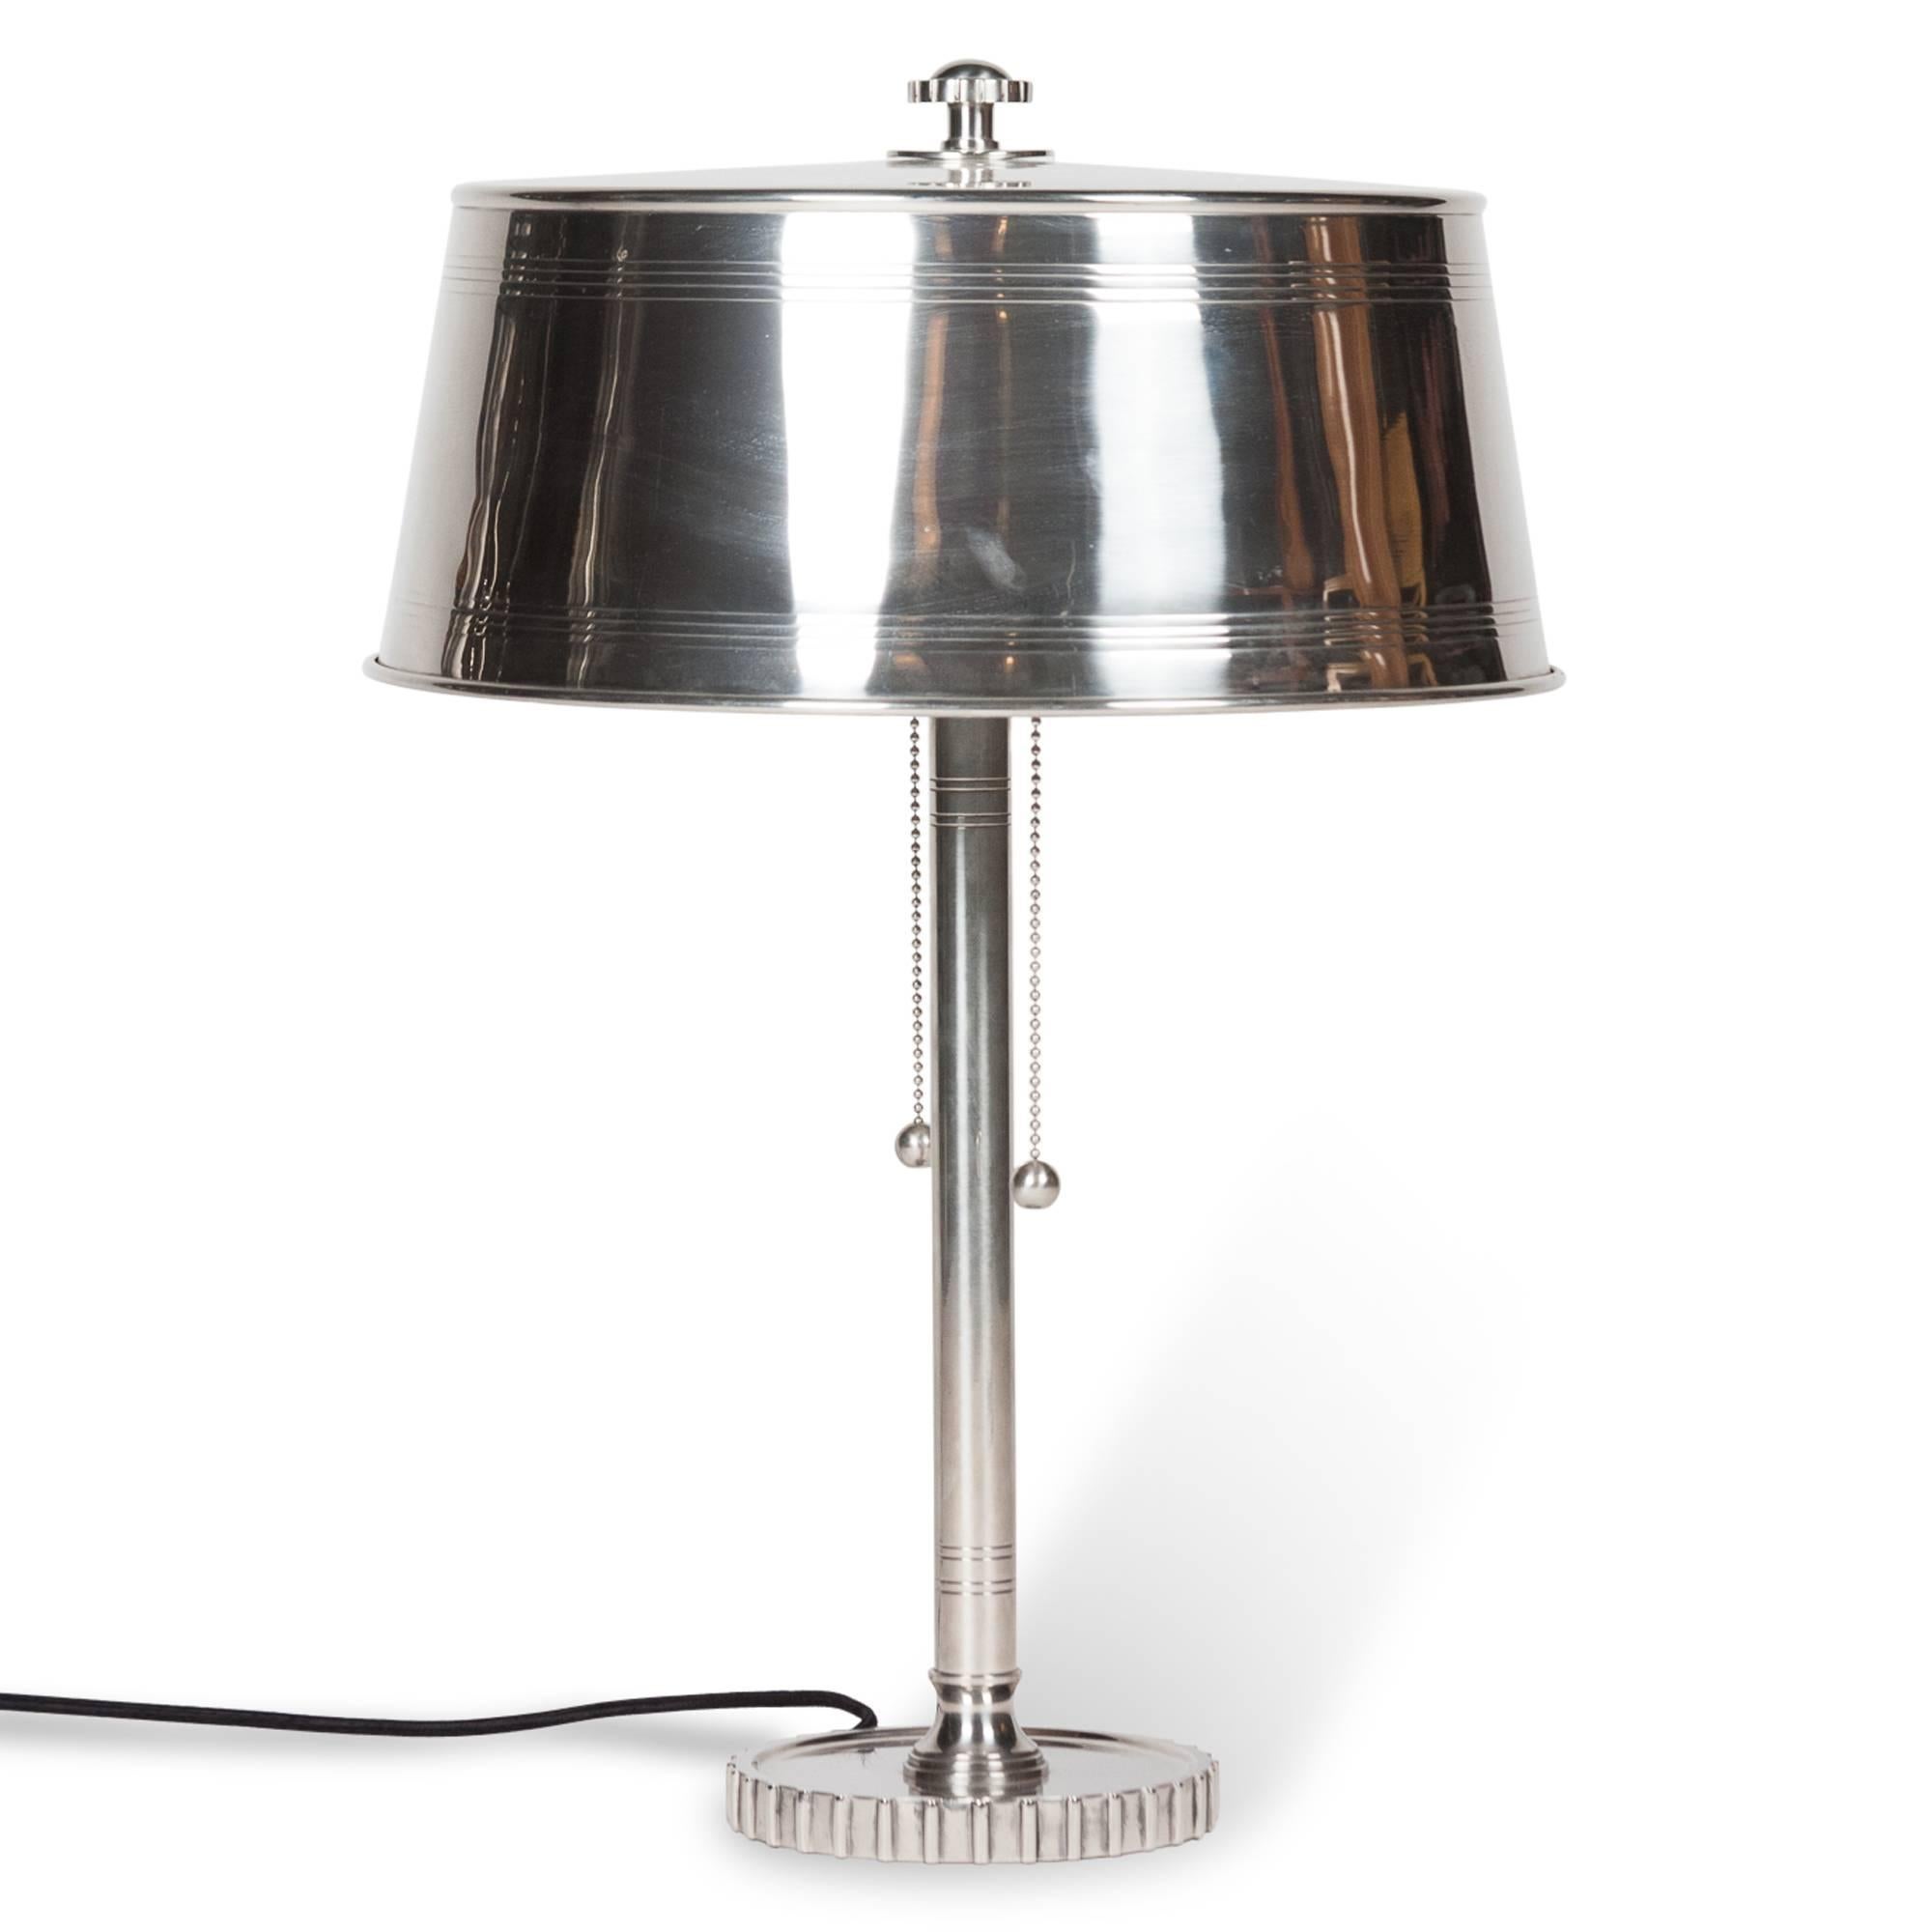 Nickel table lamp, the circular base in the shape of a gear, of column-form with nickel shade, gear-top finial, two ball chain pulls by Walter Kantack, American, late 1920s. Measures: 21 ¼ in. overall height with finial, 14 ½ in. diameter (shade). A